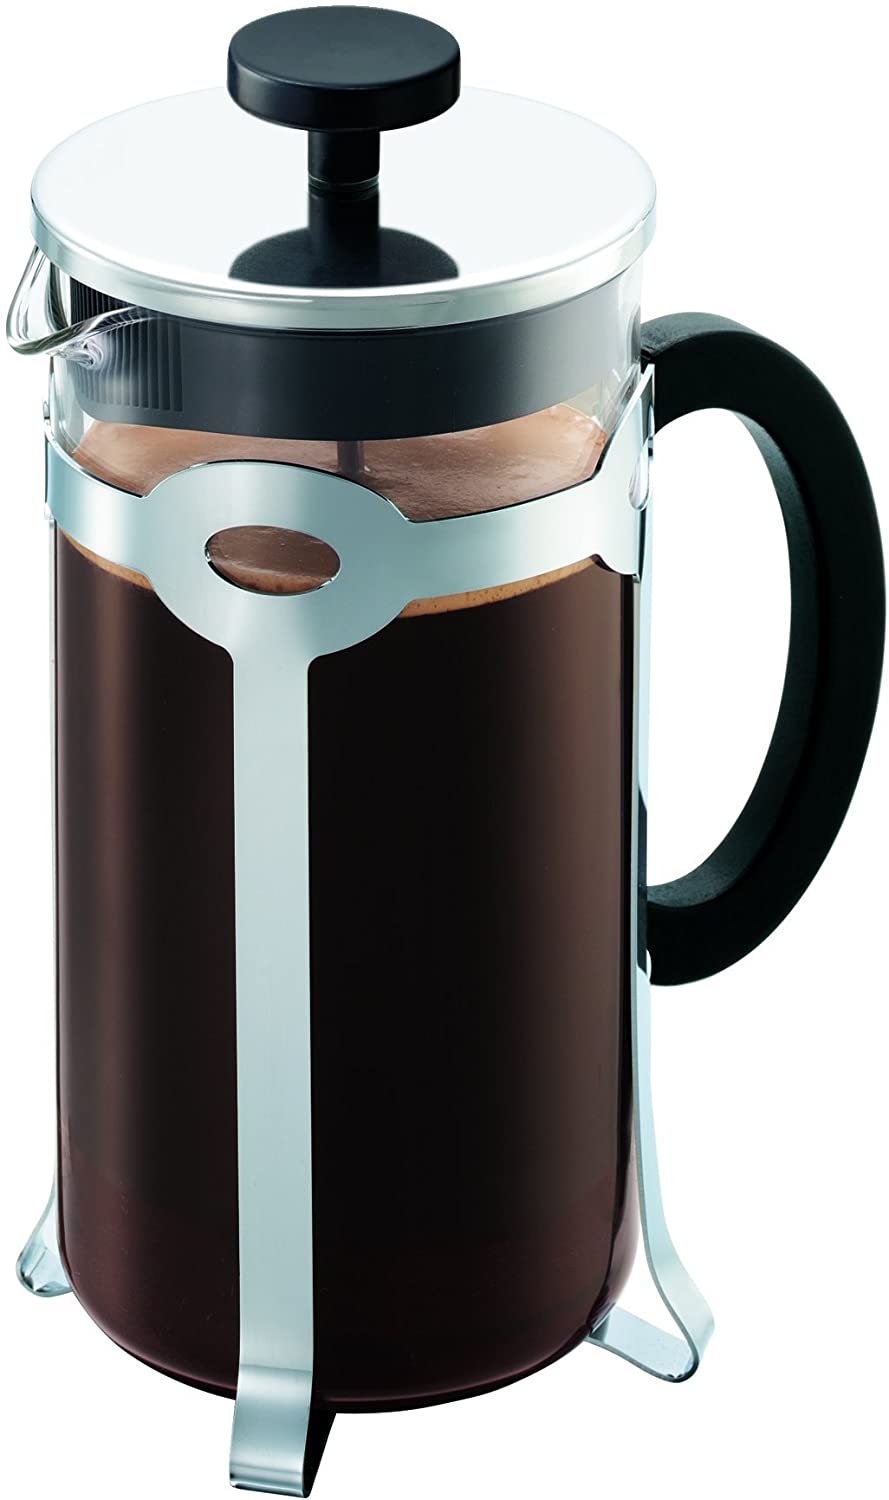 Bodum 11887-16-10 Bistro Coffee Maker 8 Cups 1.0 L with Cup Container Made of PC Stainless Steel